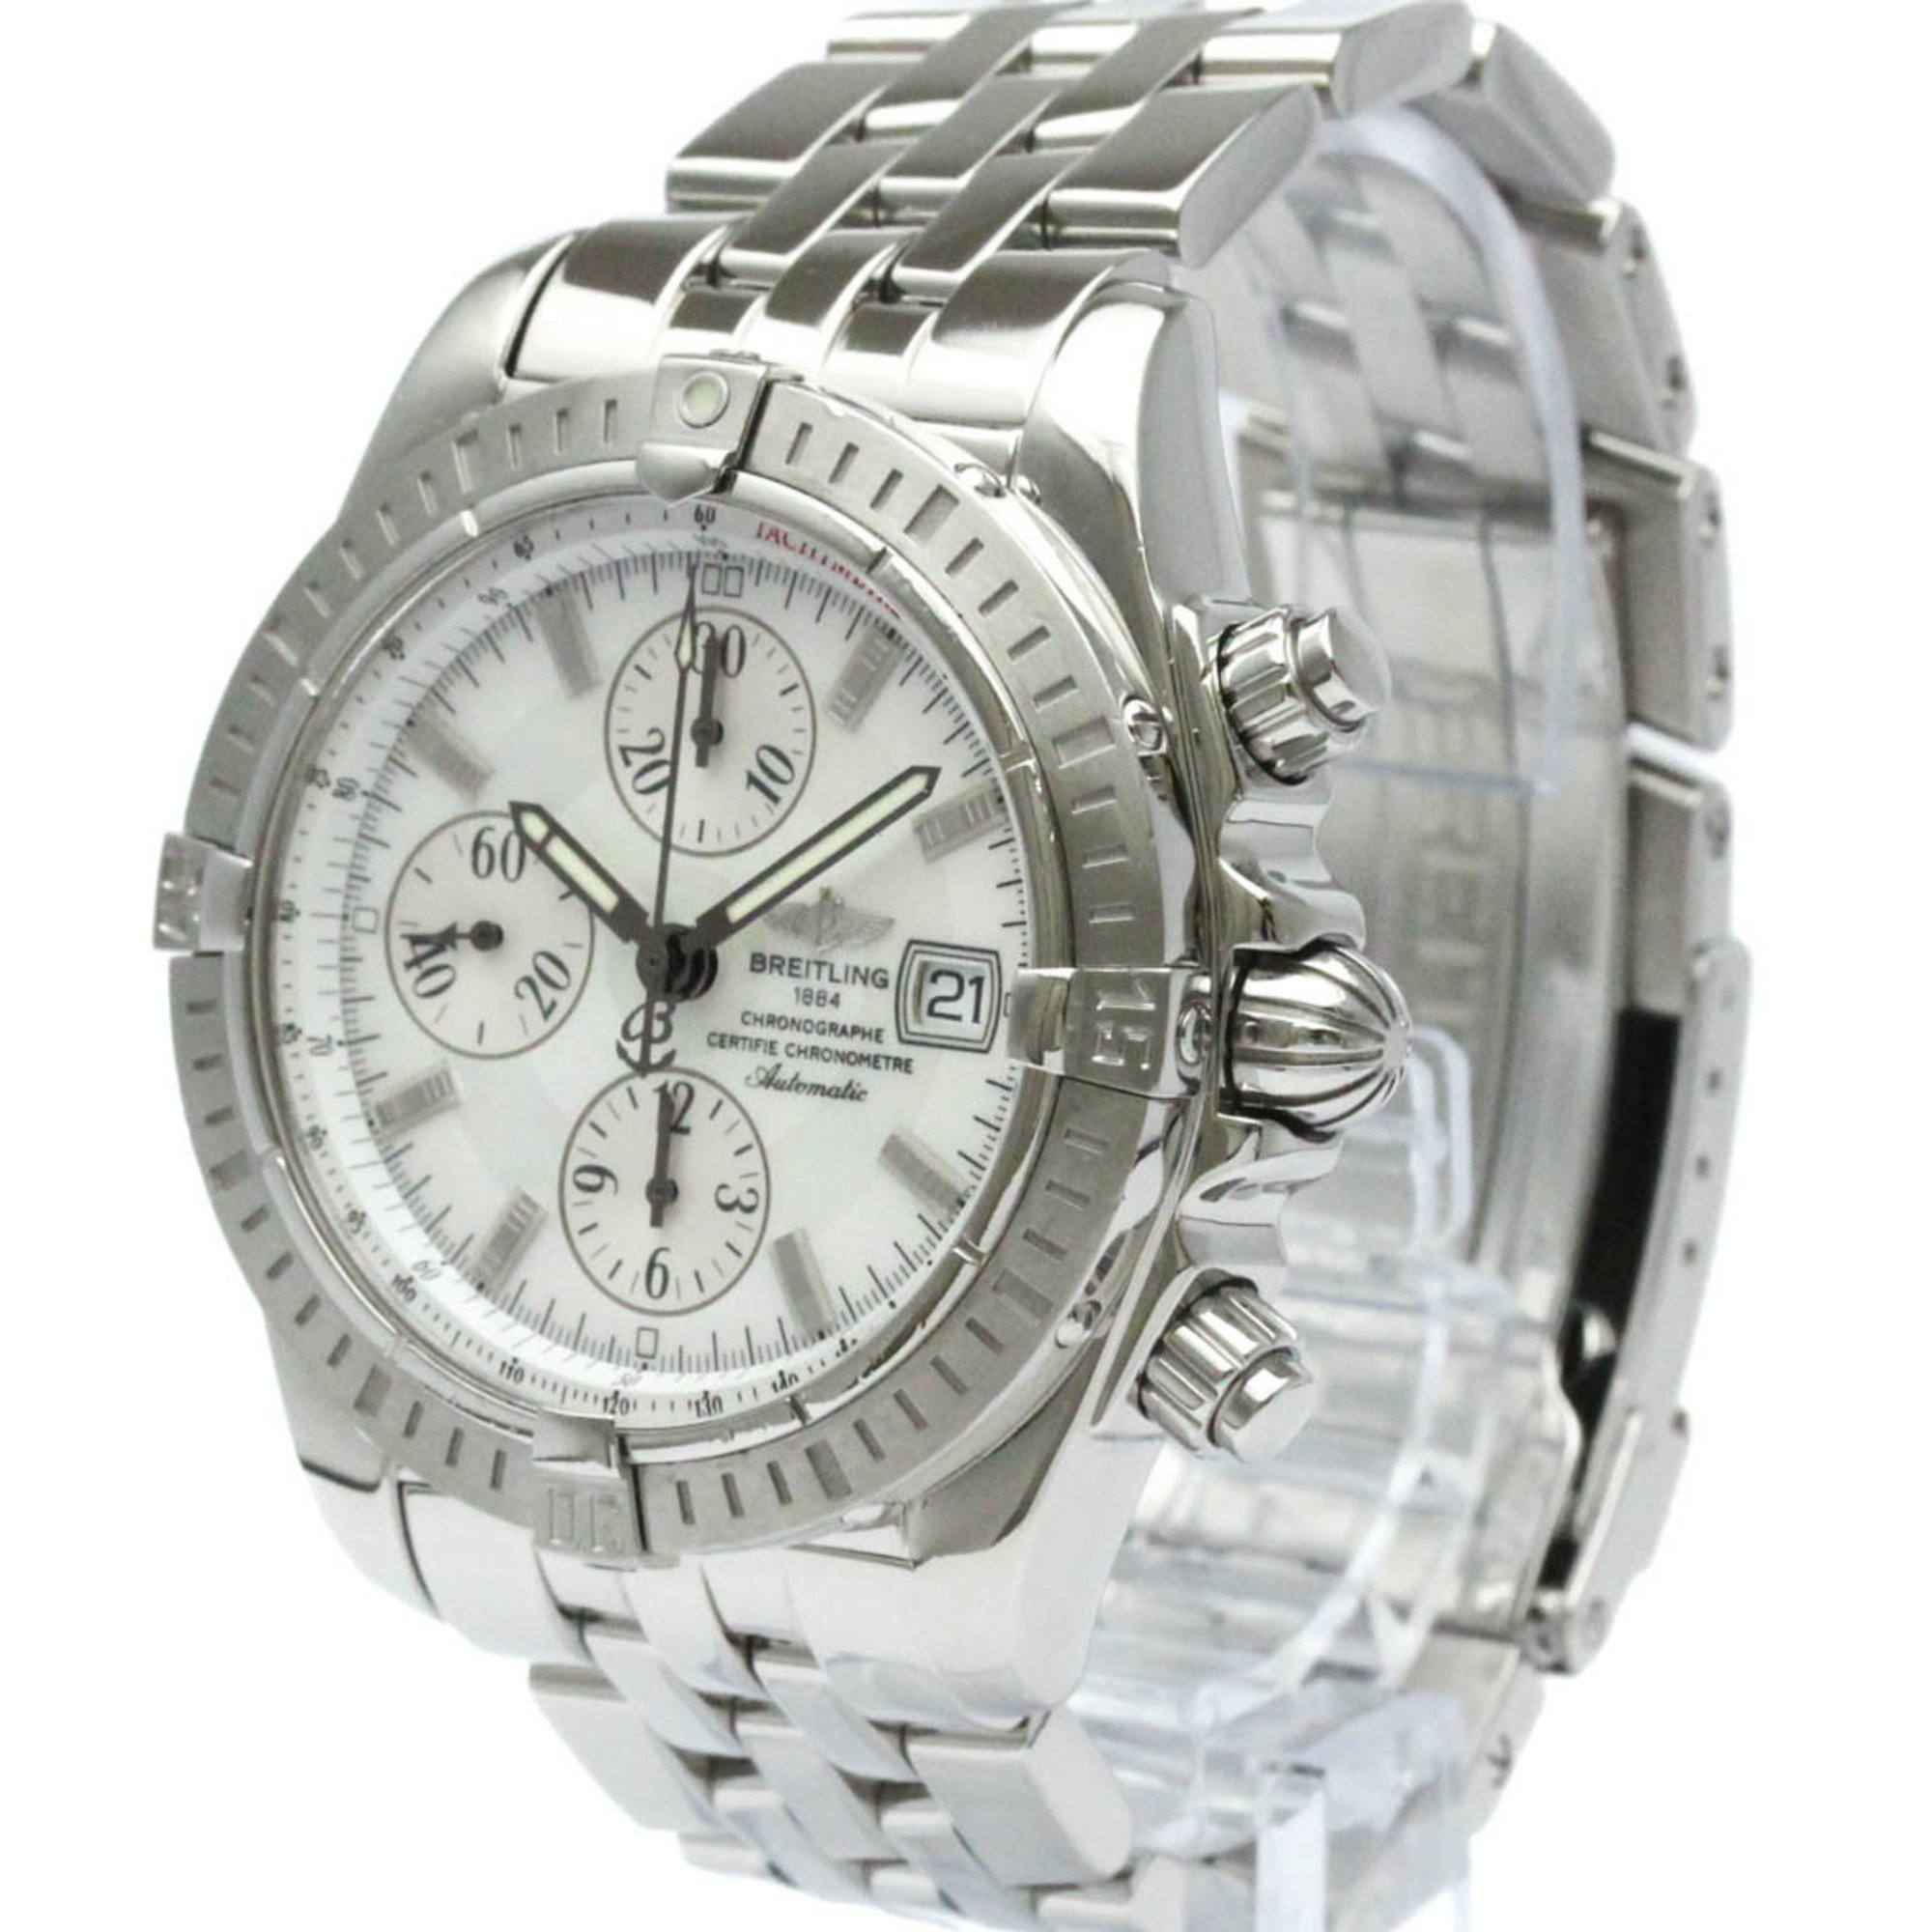 Polished BREITLING Chronomat Evolution MOP Steel Automatic Watch A13356 BF571641